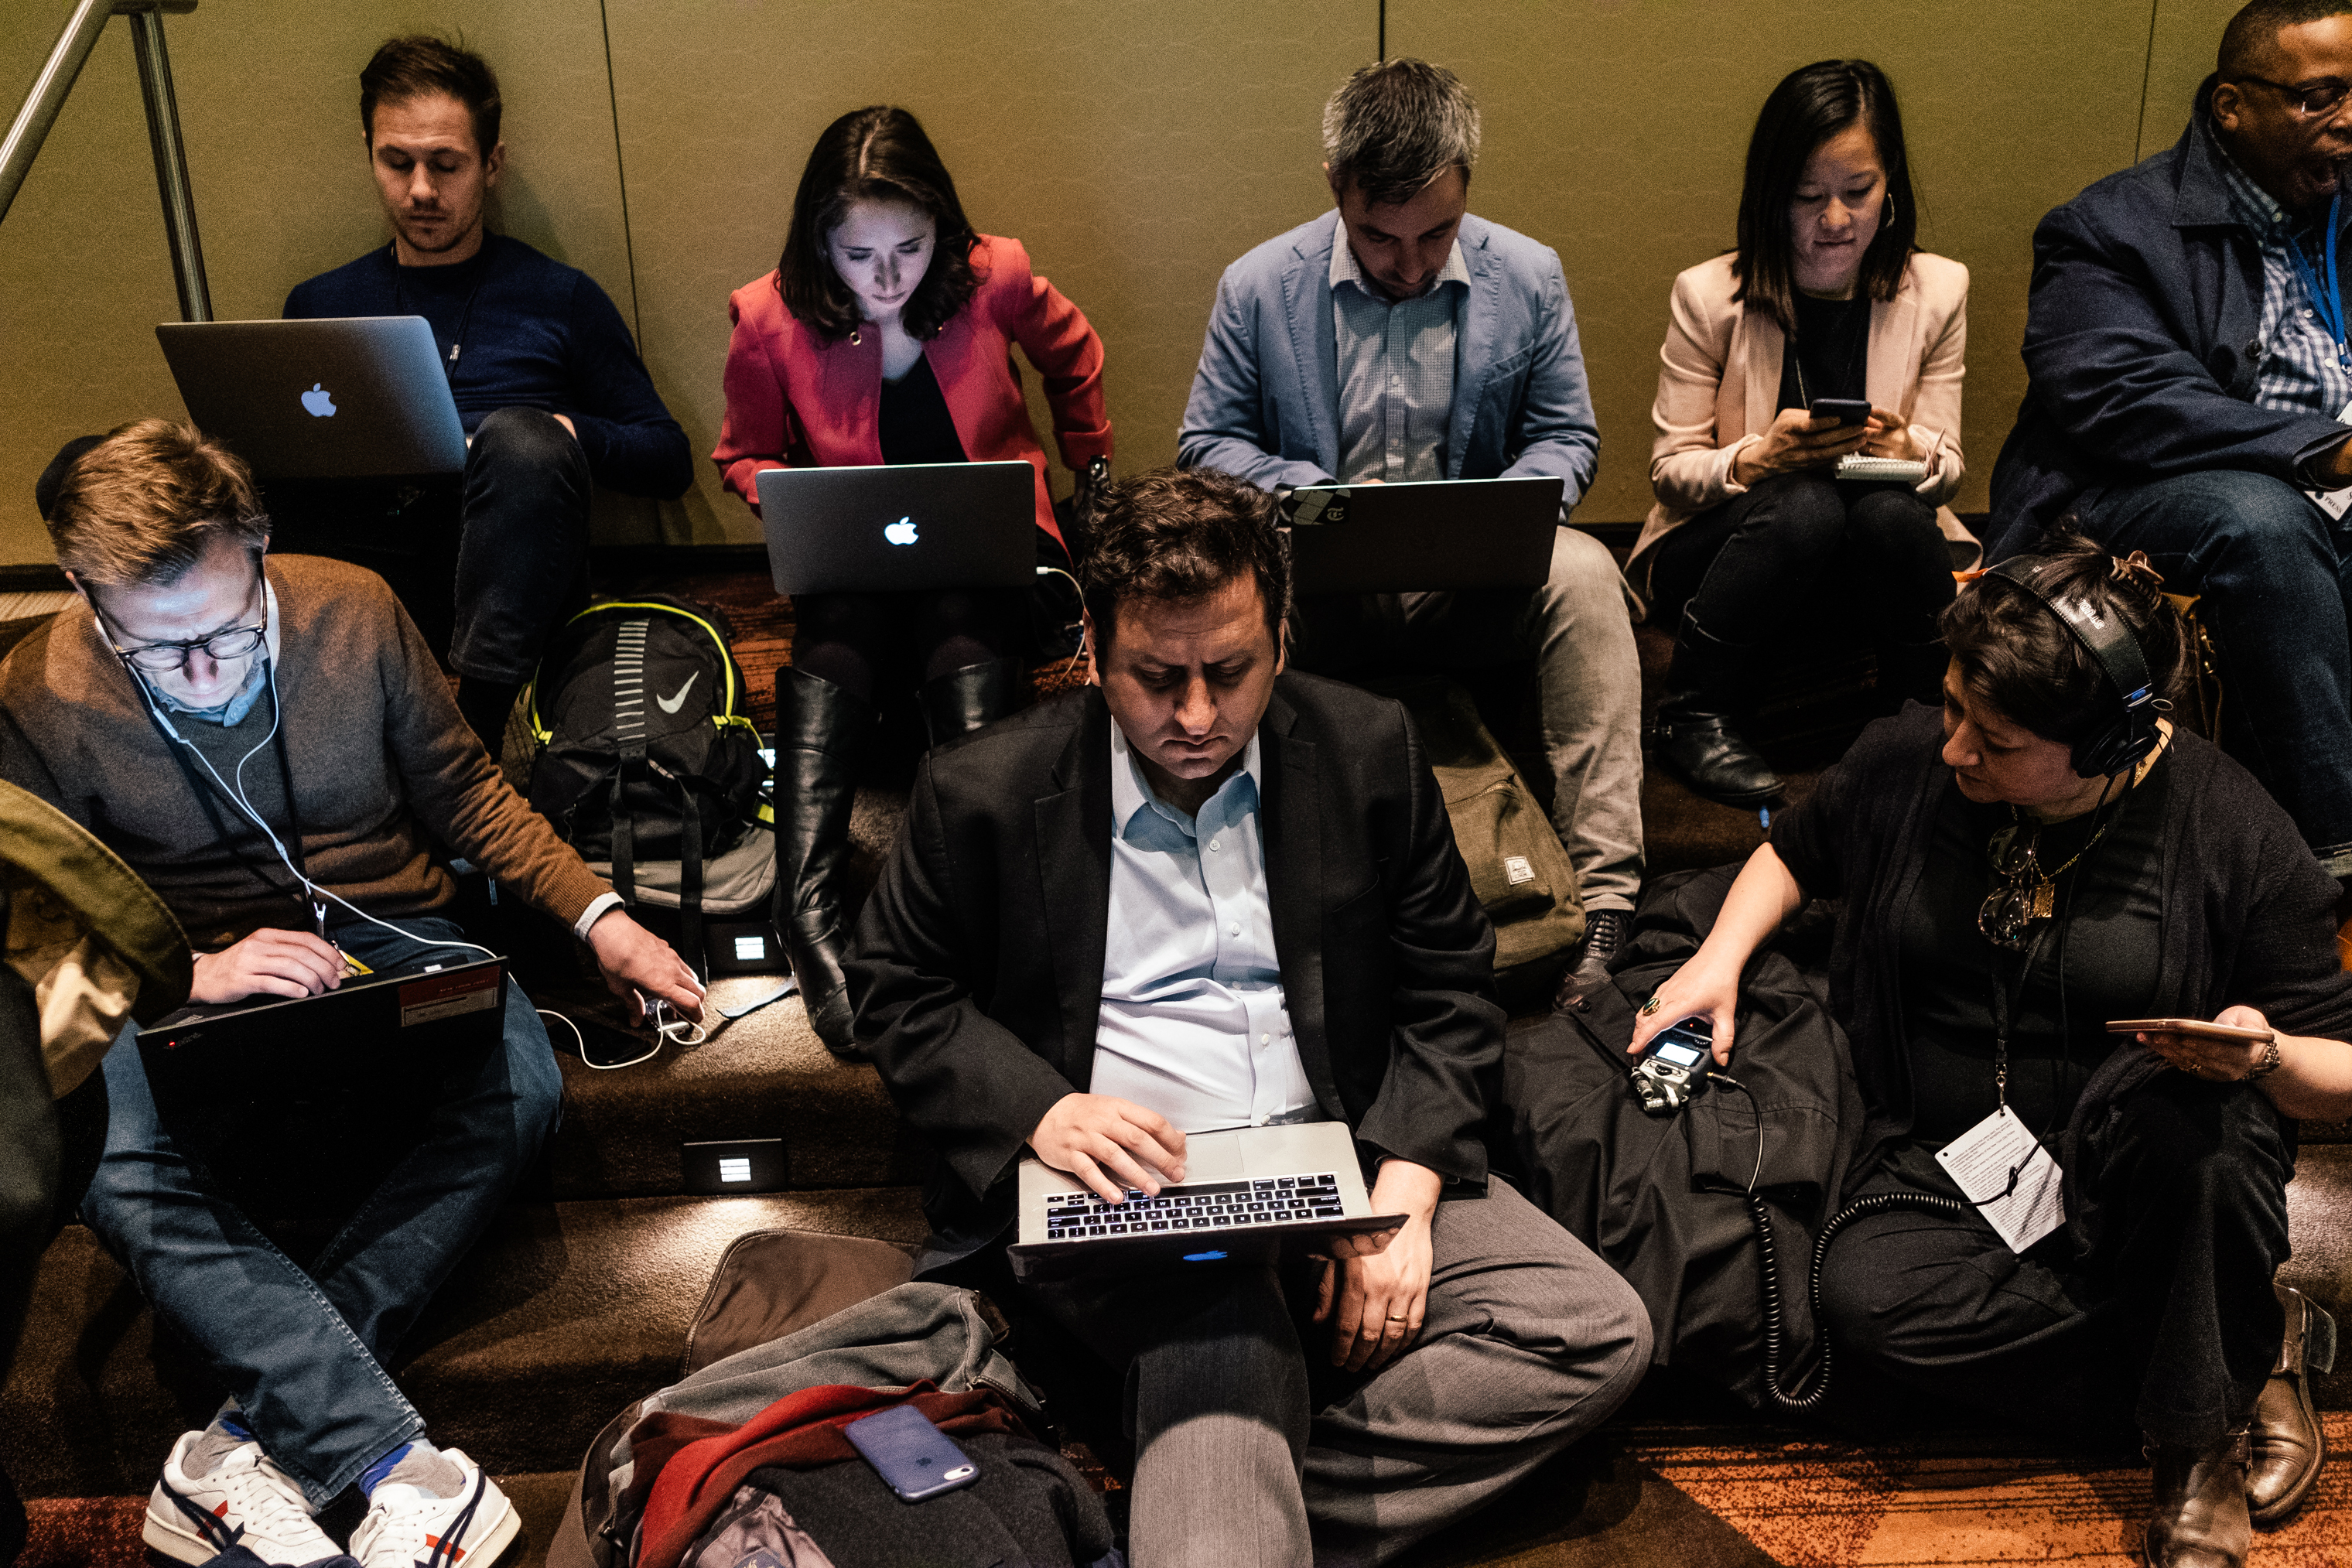 Members of the press during the annual National Action Network Convention or NAN in the Sheraton Hotel in Manhattan on April 5, 2019. (Christopher Lee for TIME)